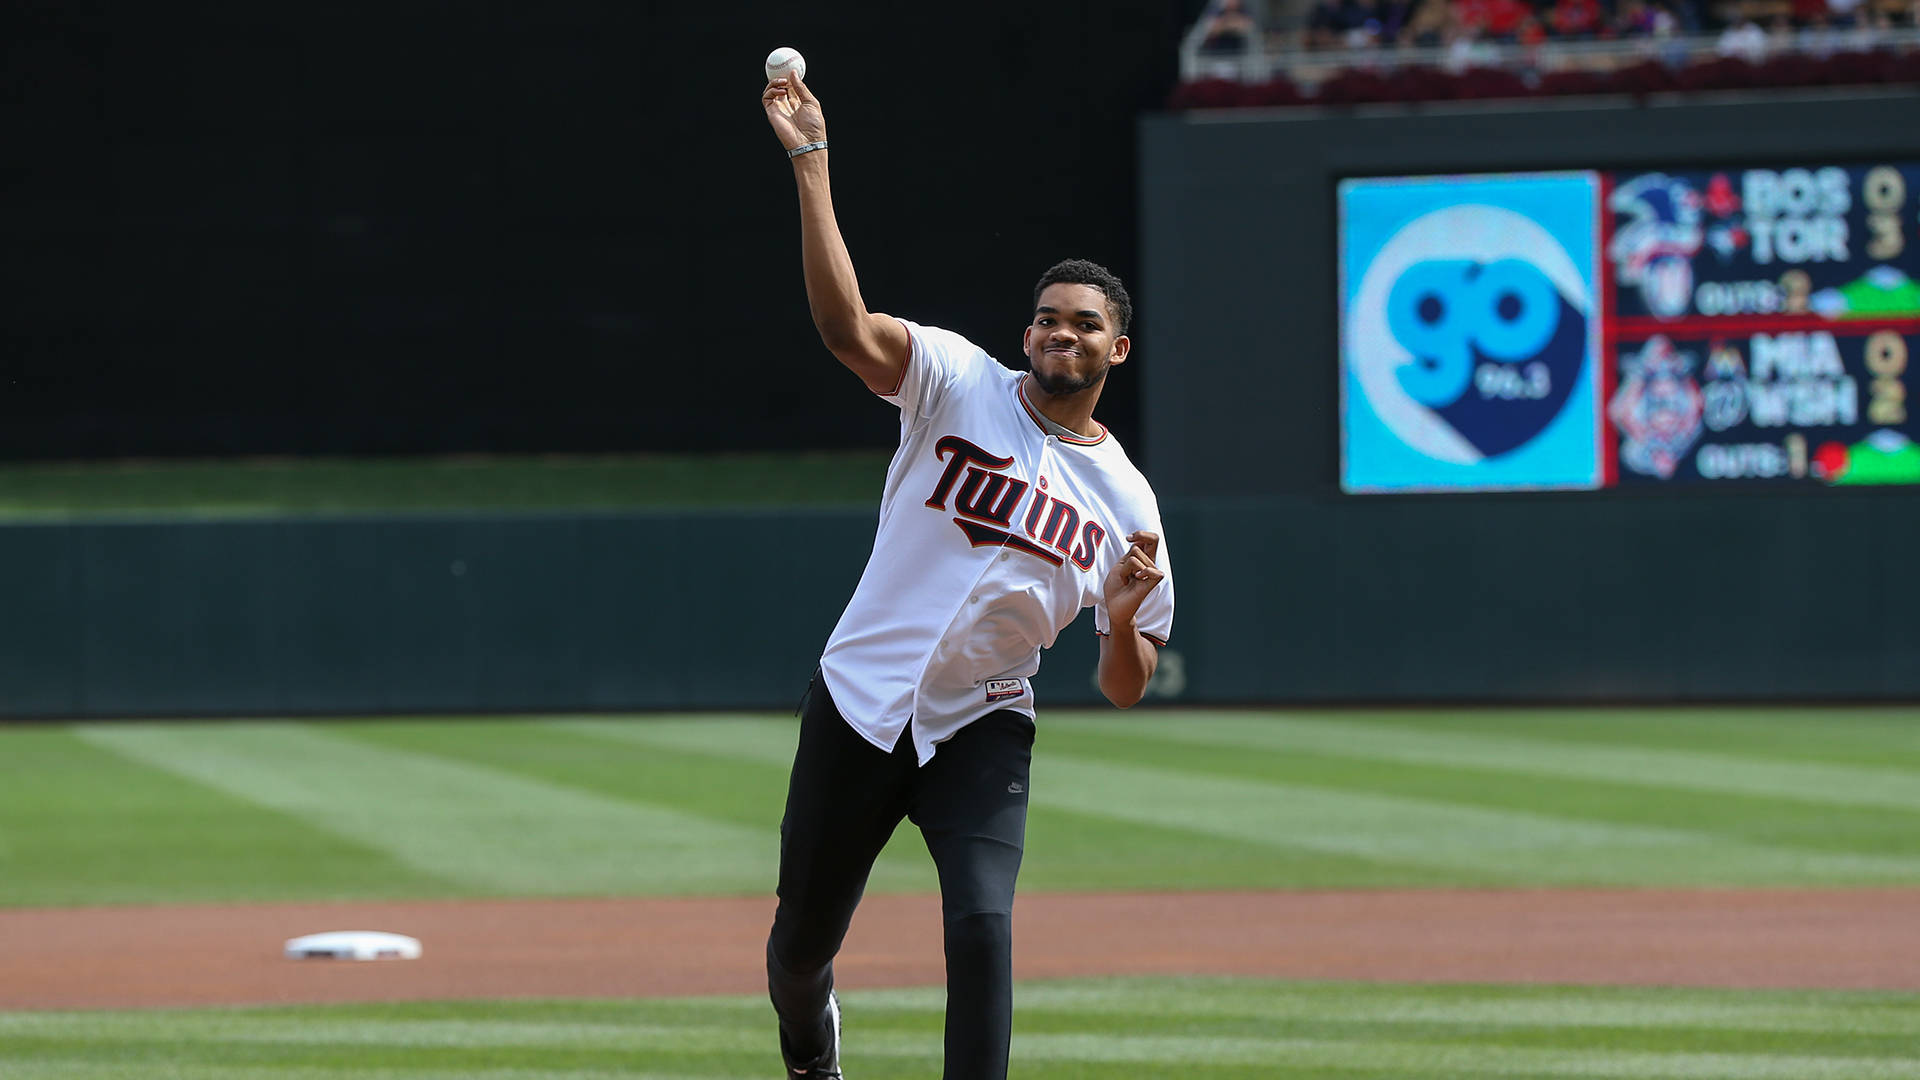 Karl-anthony Towns In Baseball Field